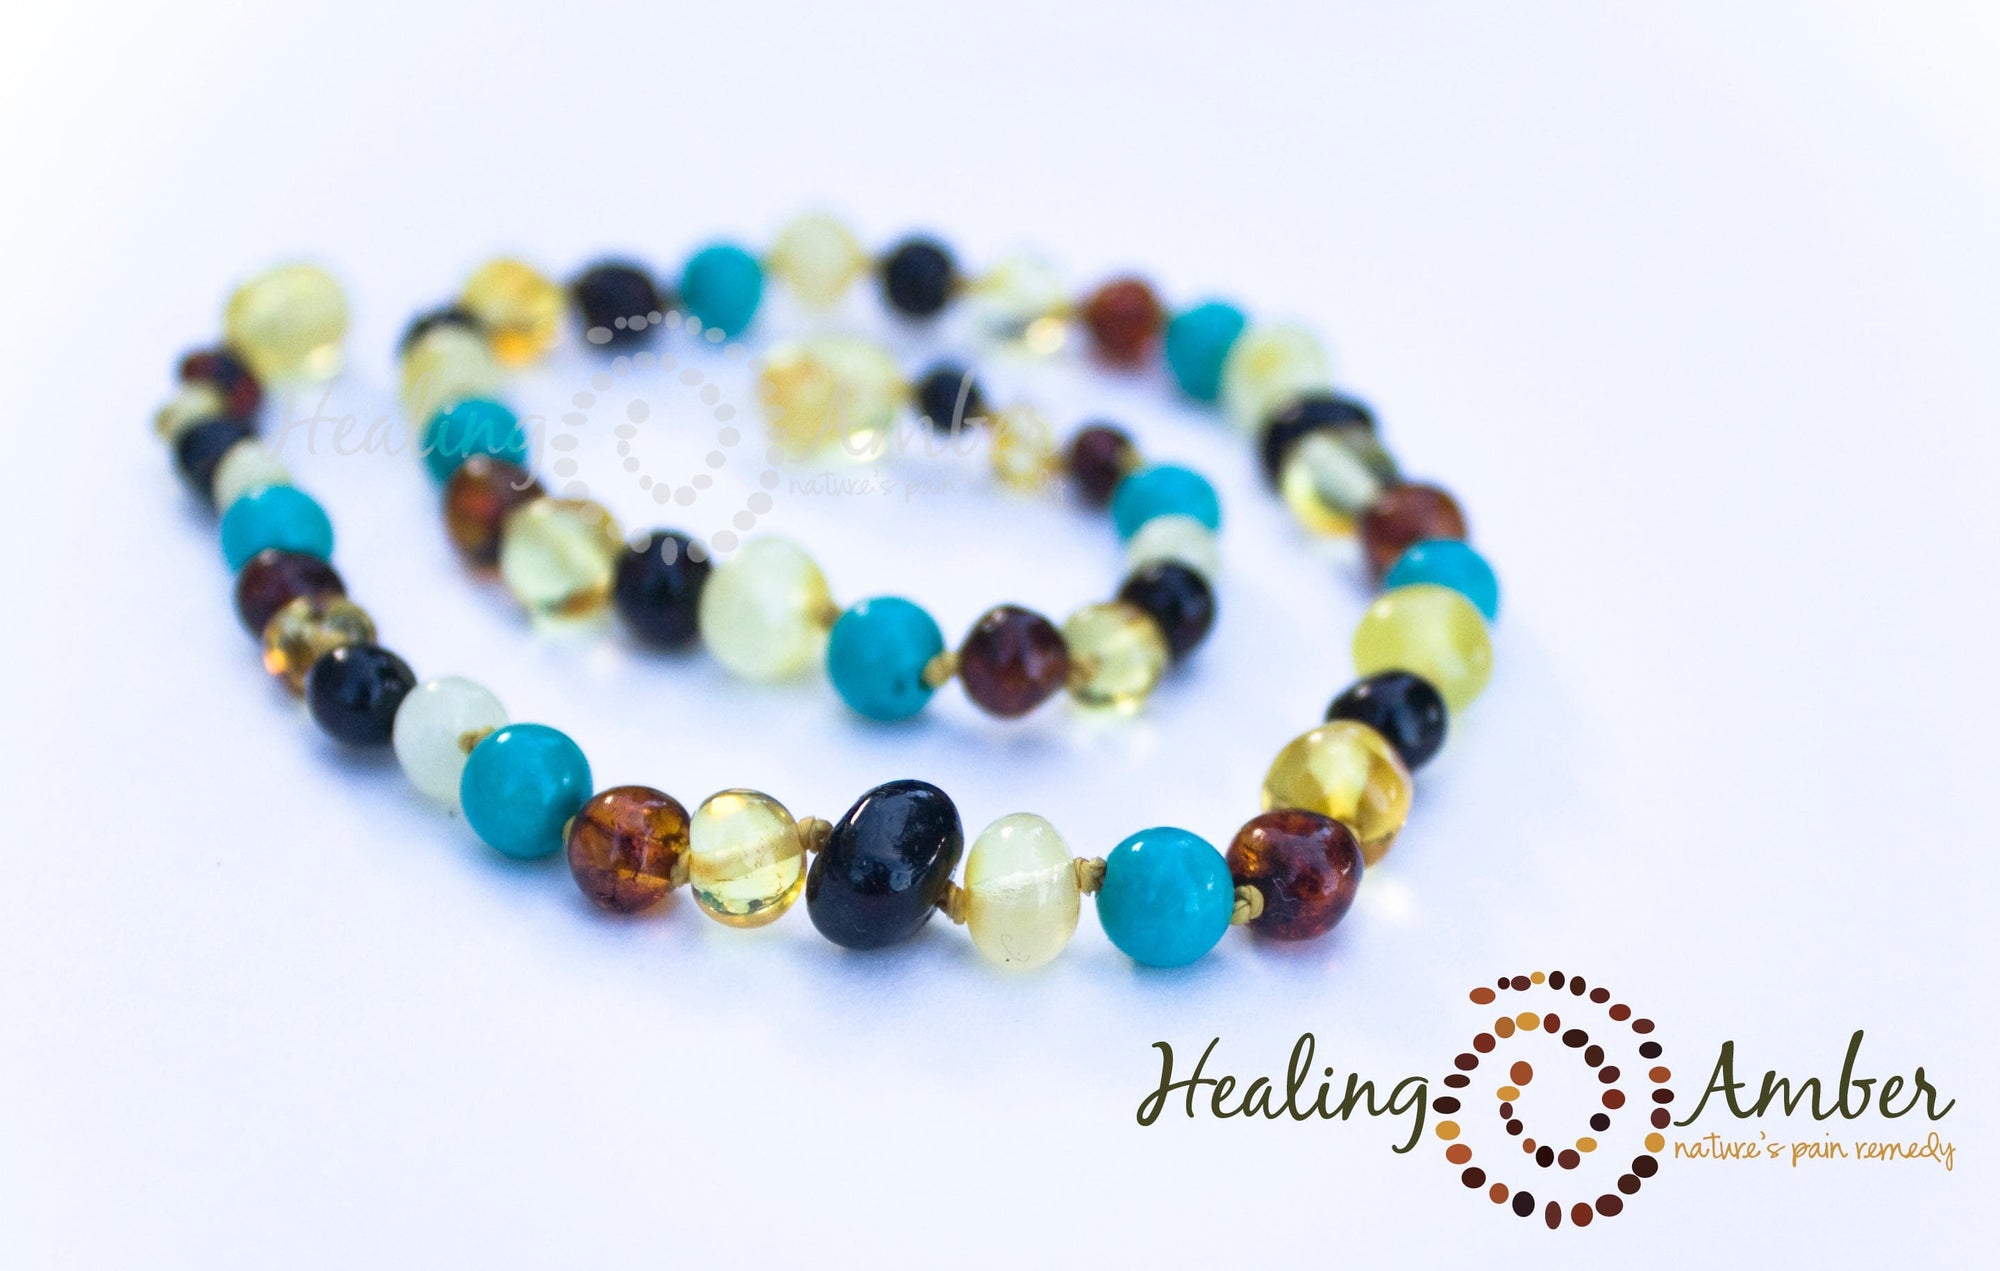 Healing Amber amber anklet 5.5 inch Healing Amber Baltic Amber Anklet/Bracelet - Multi Amber and Turquoise Gemstone